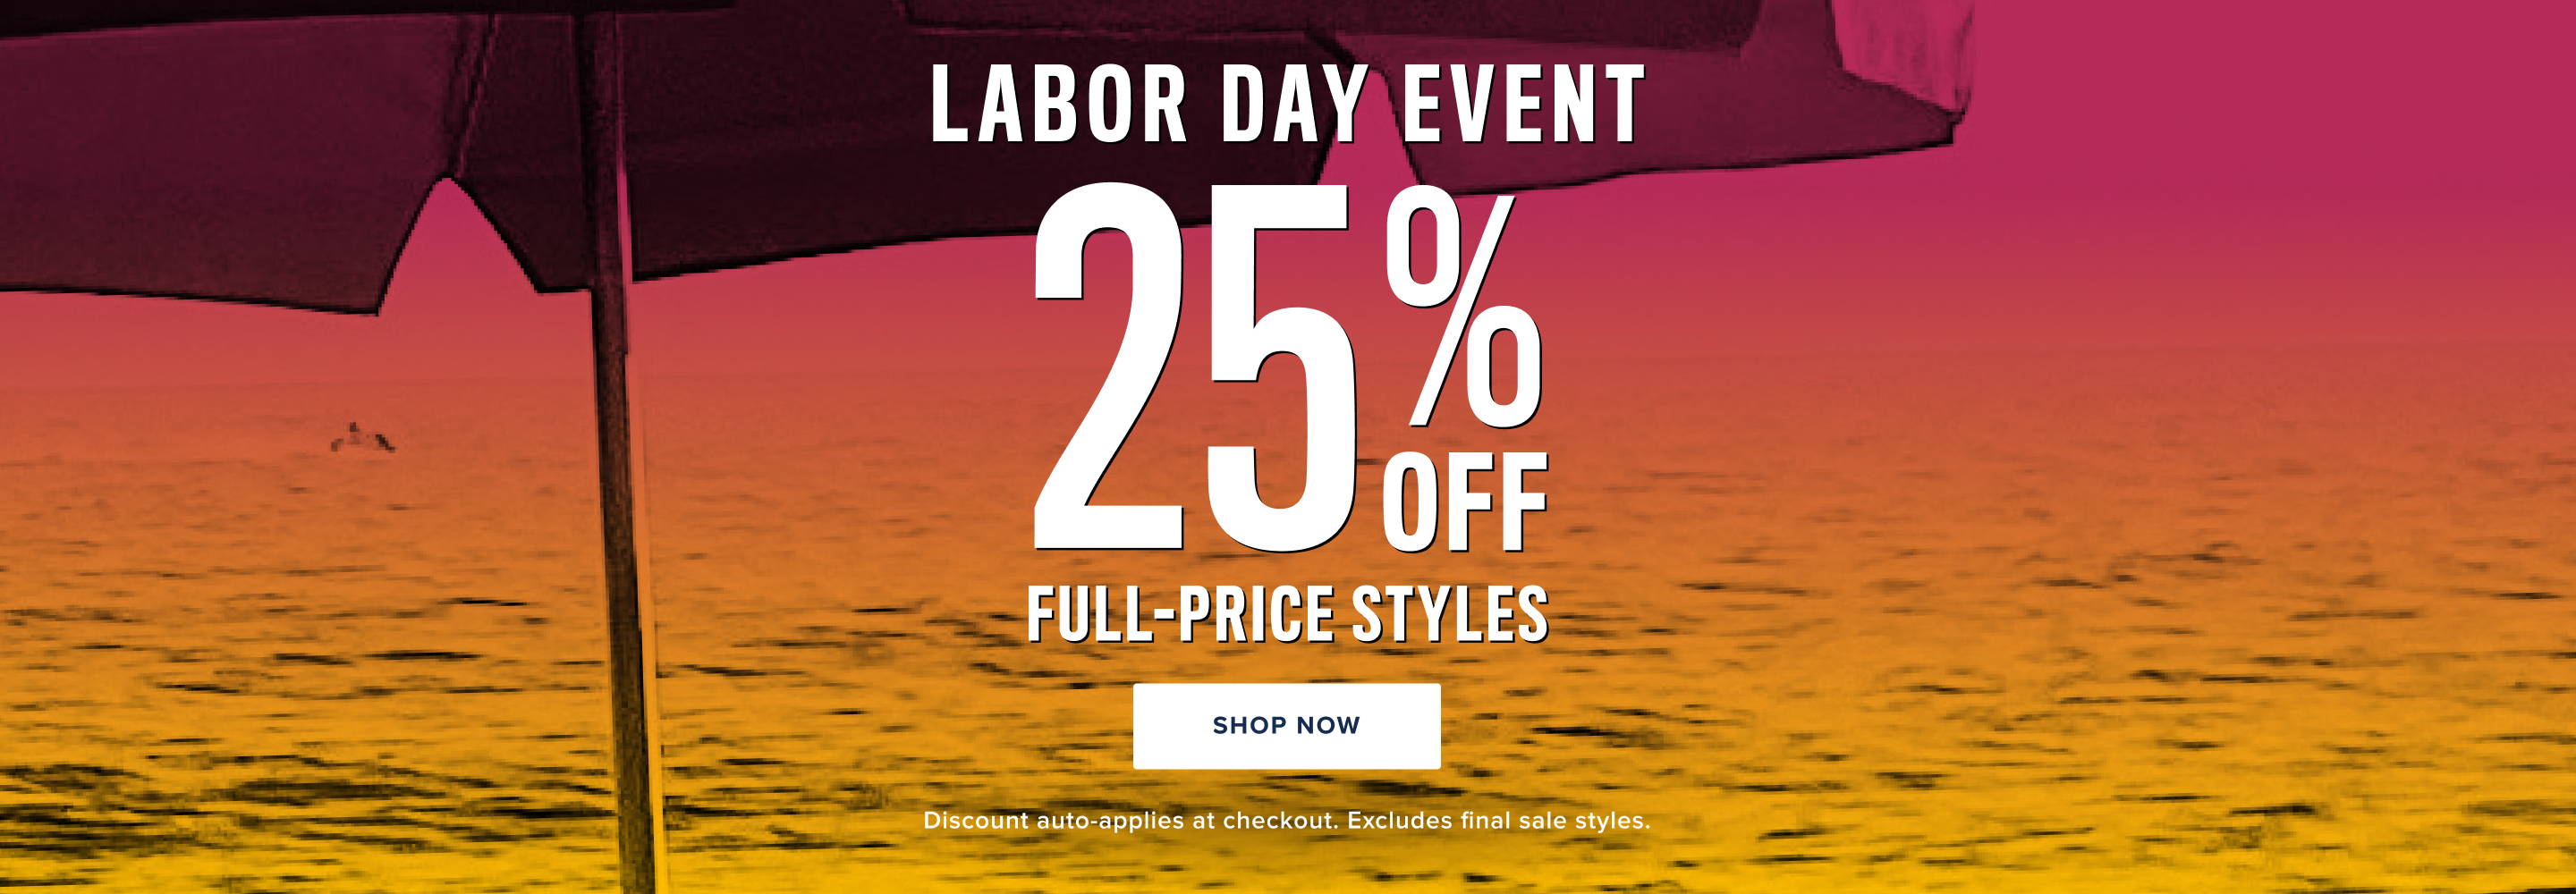 Labor Day Event 25% off full-priced styles 